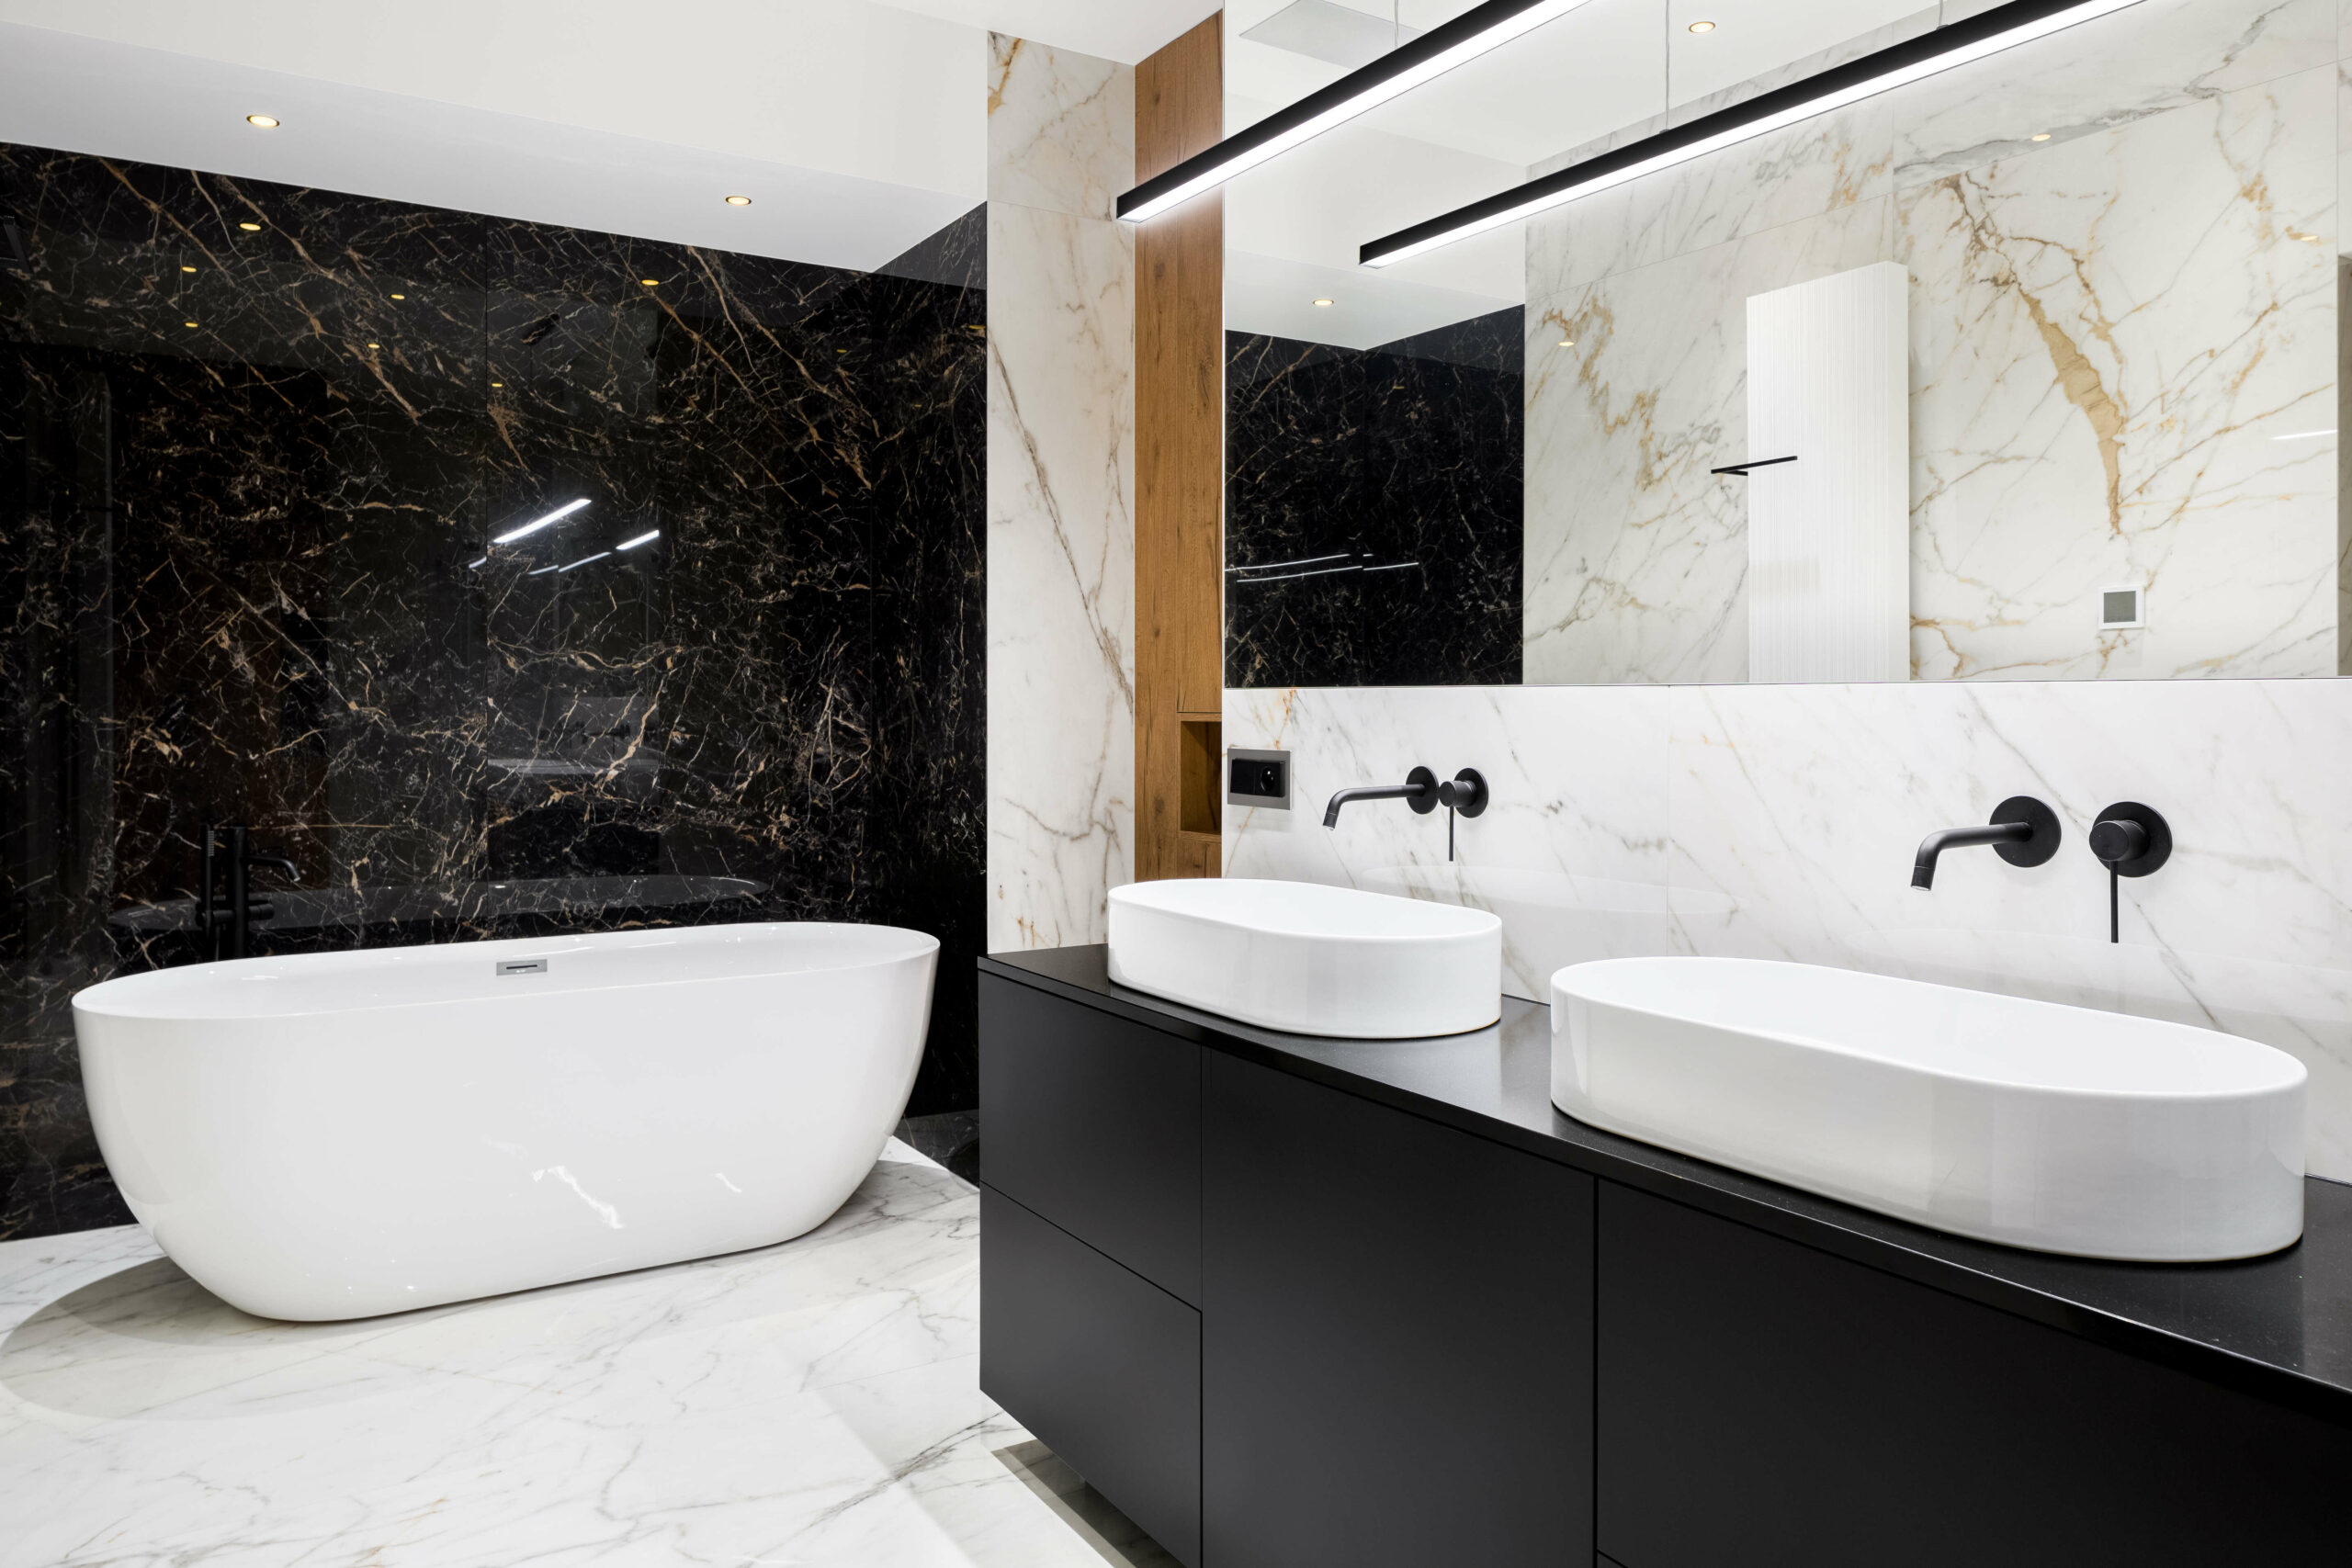 Luxury,Bathroom,With,Black,And,White,Marble,Tiles,On,Walls